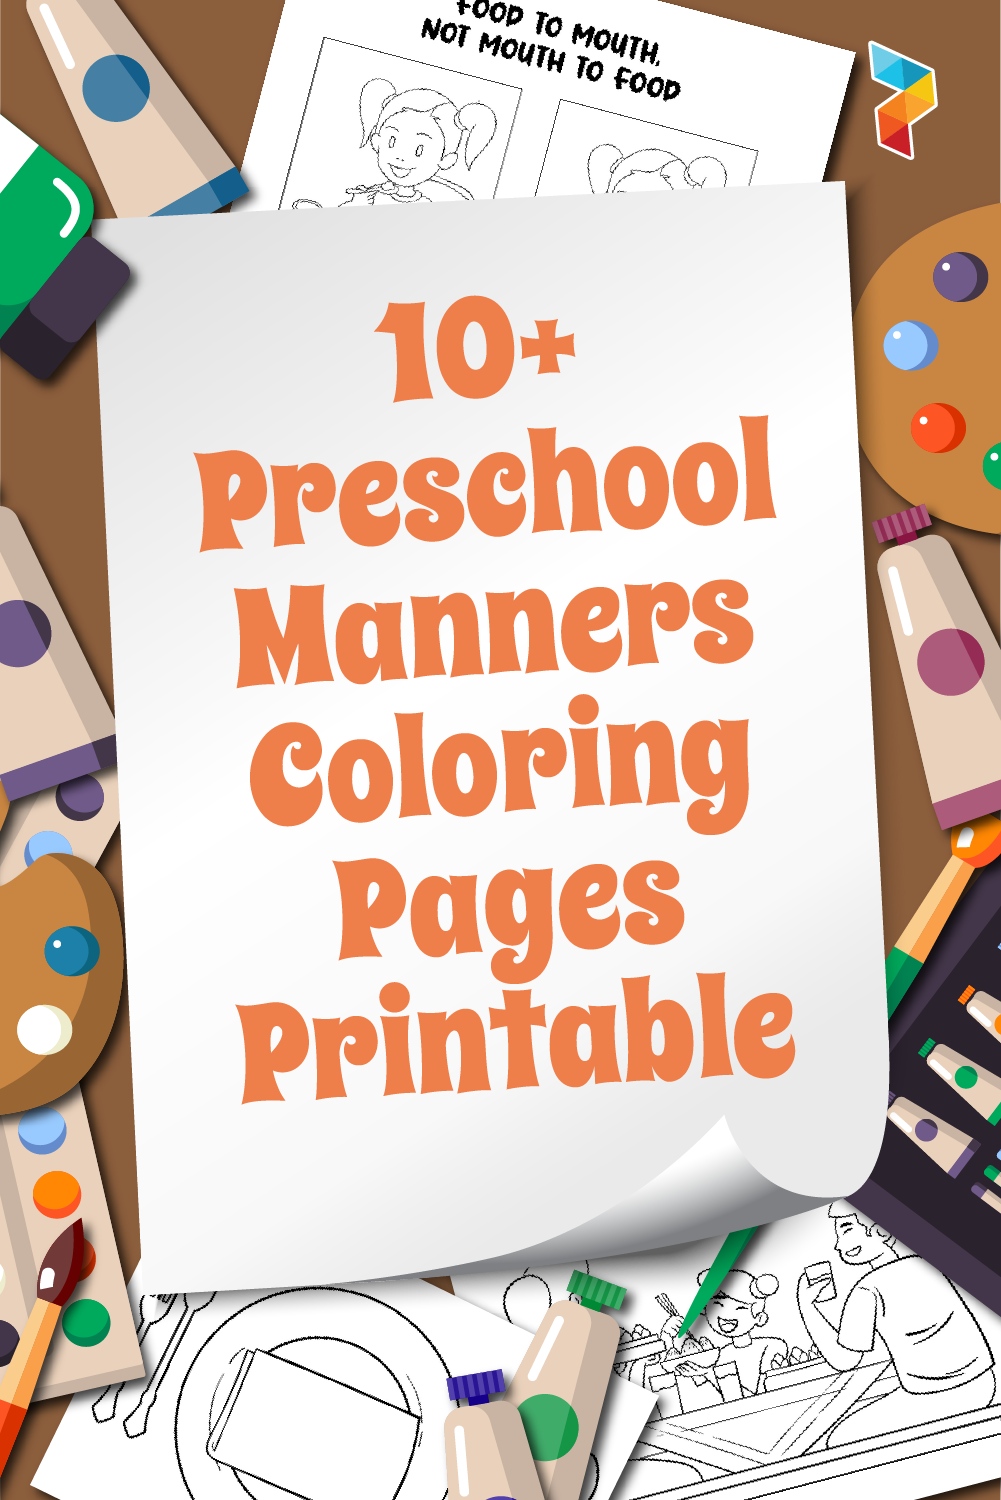 Preschool Manners Coloring Pages